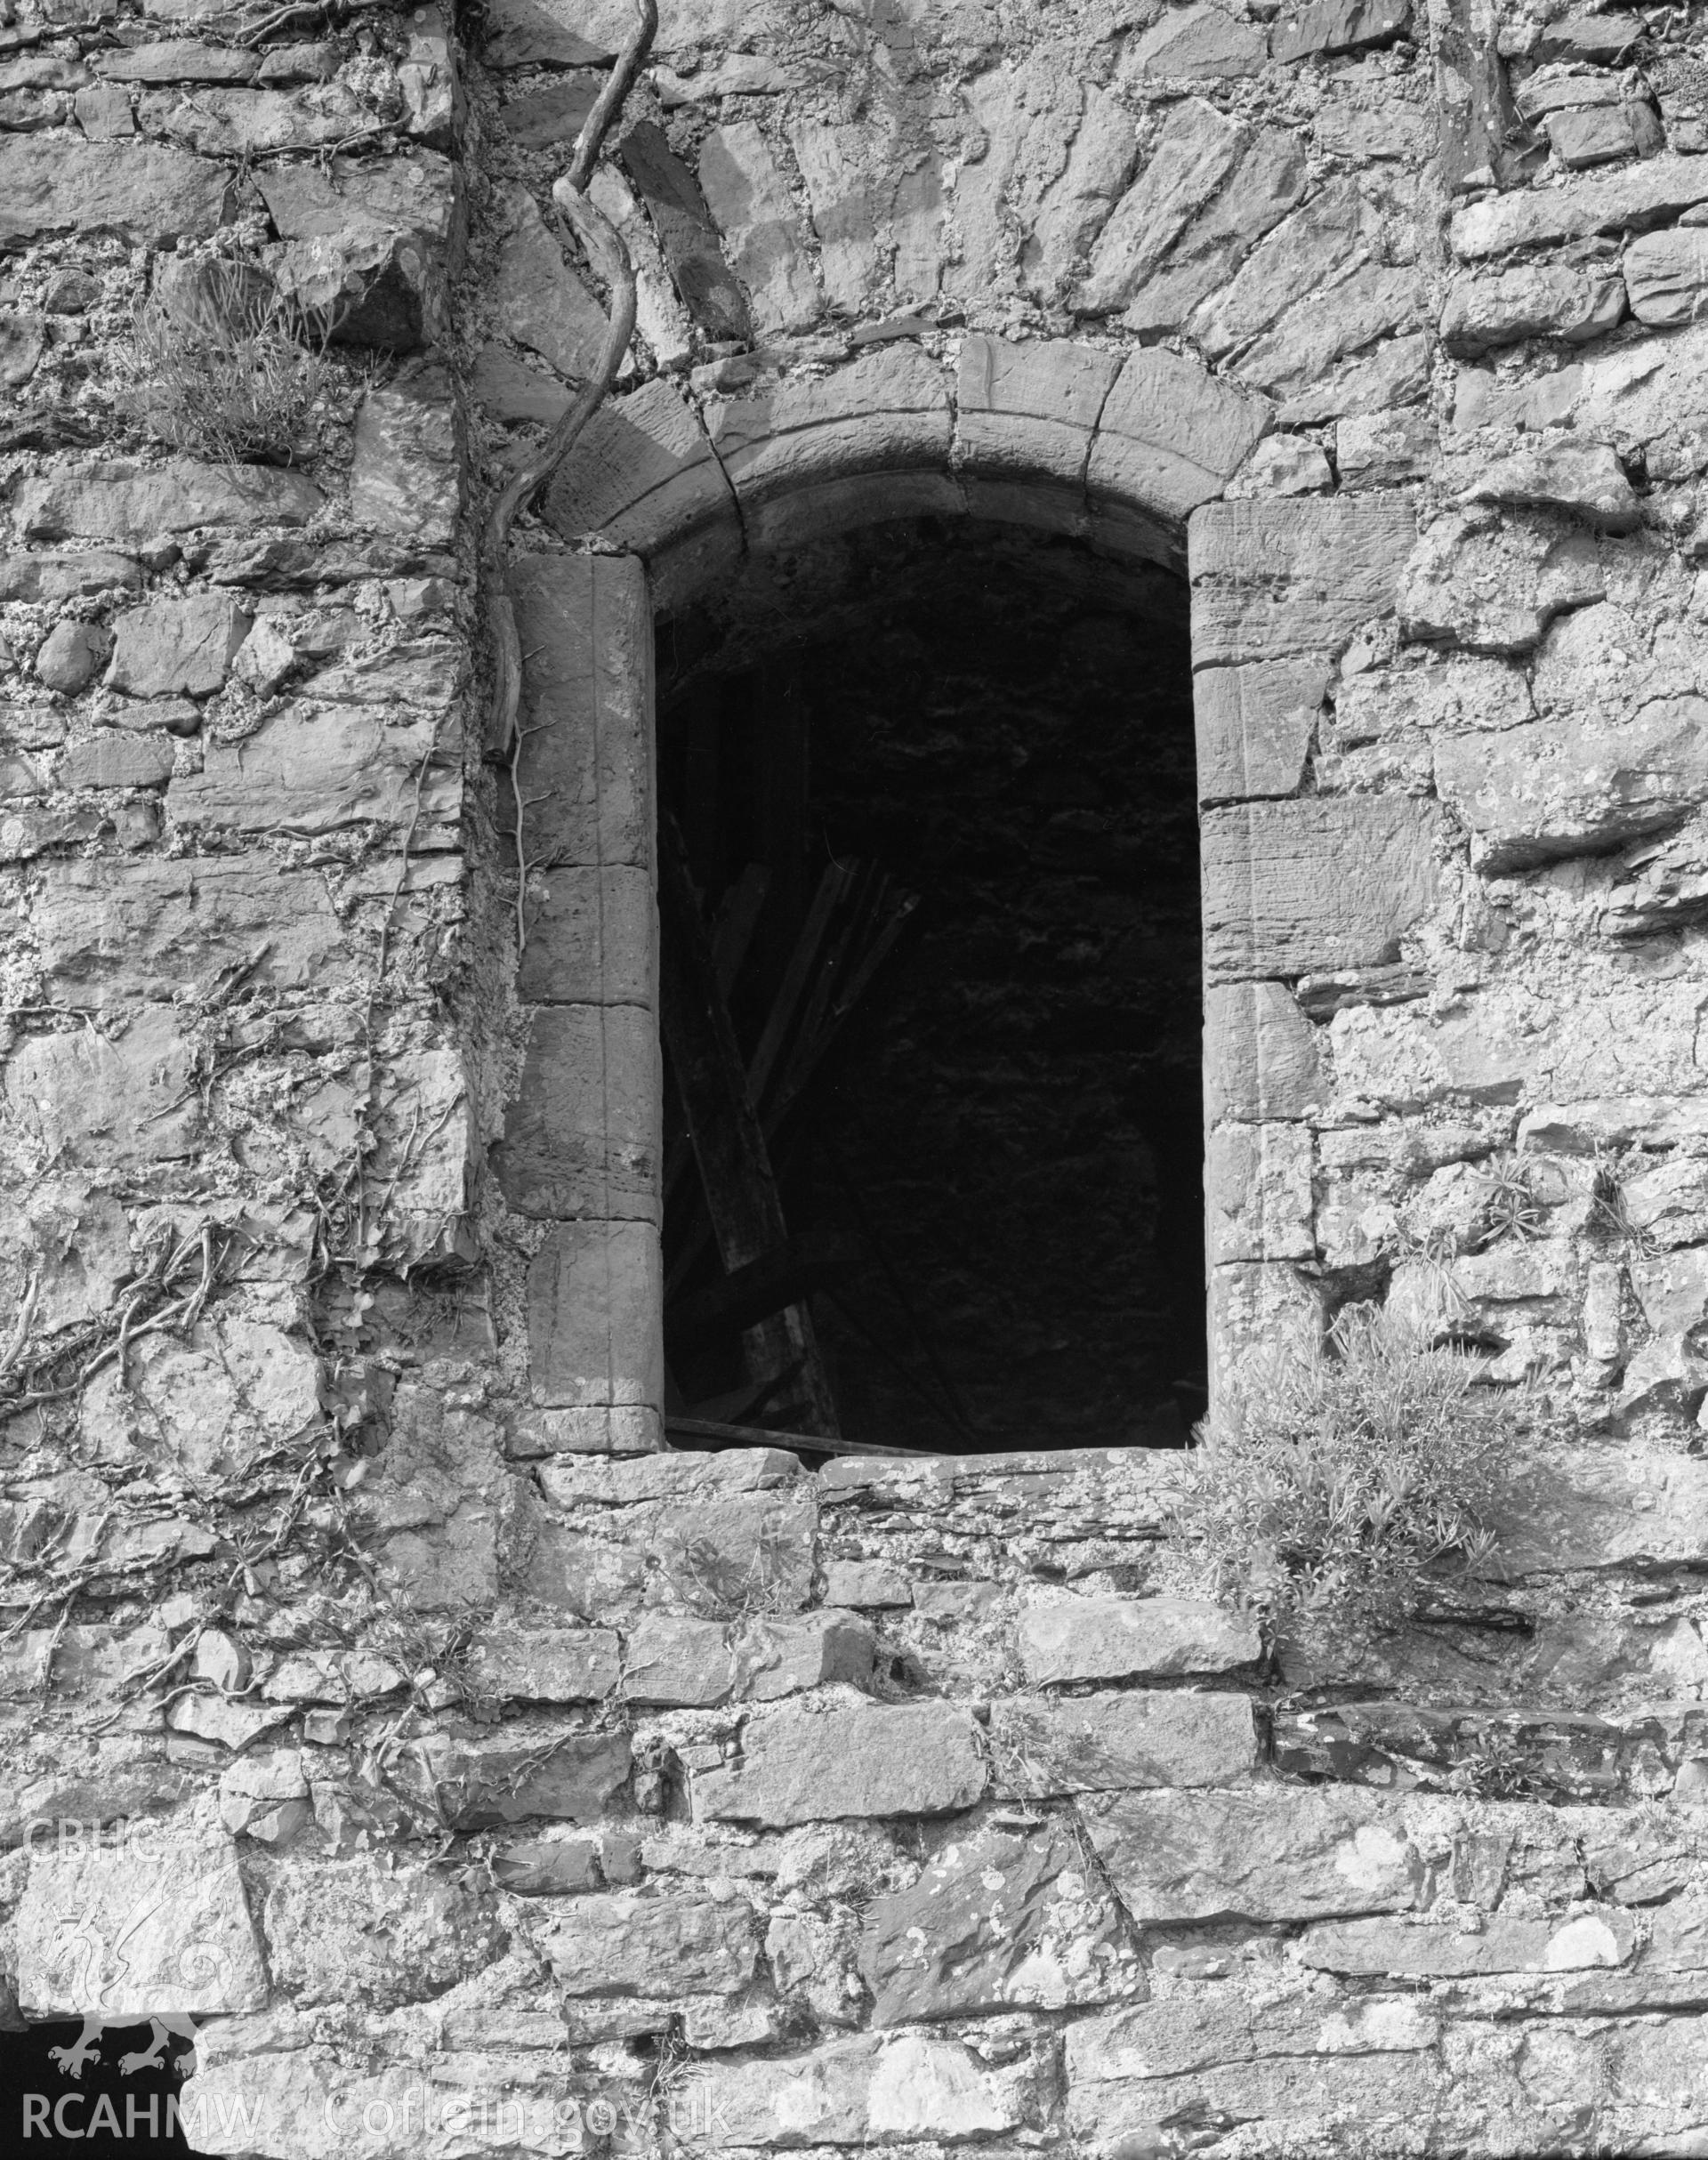 Digital copy of a view of the Old Rectory, Pele Tower.